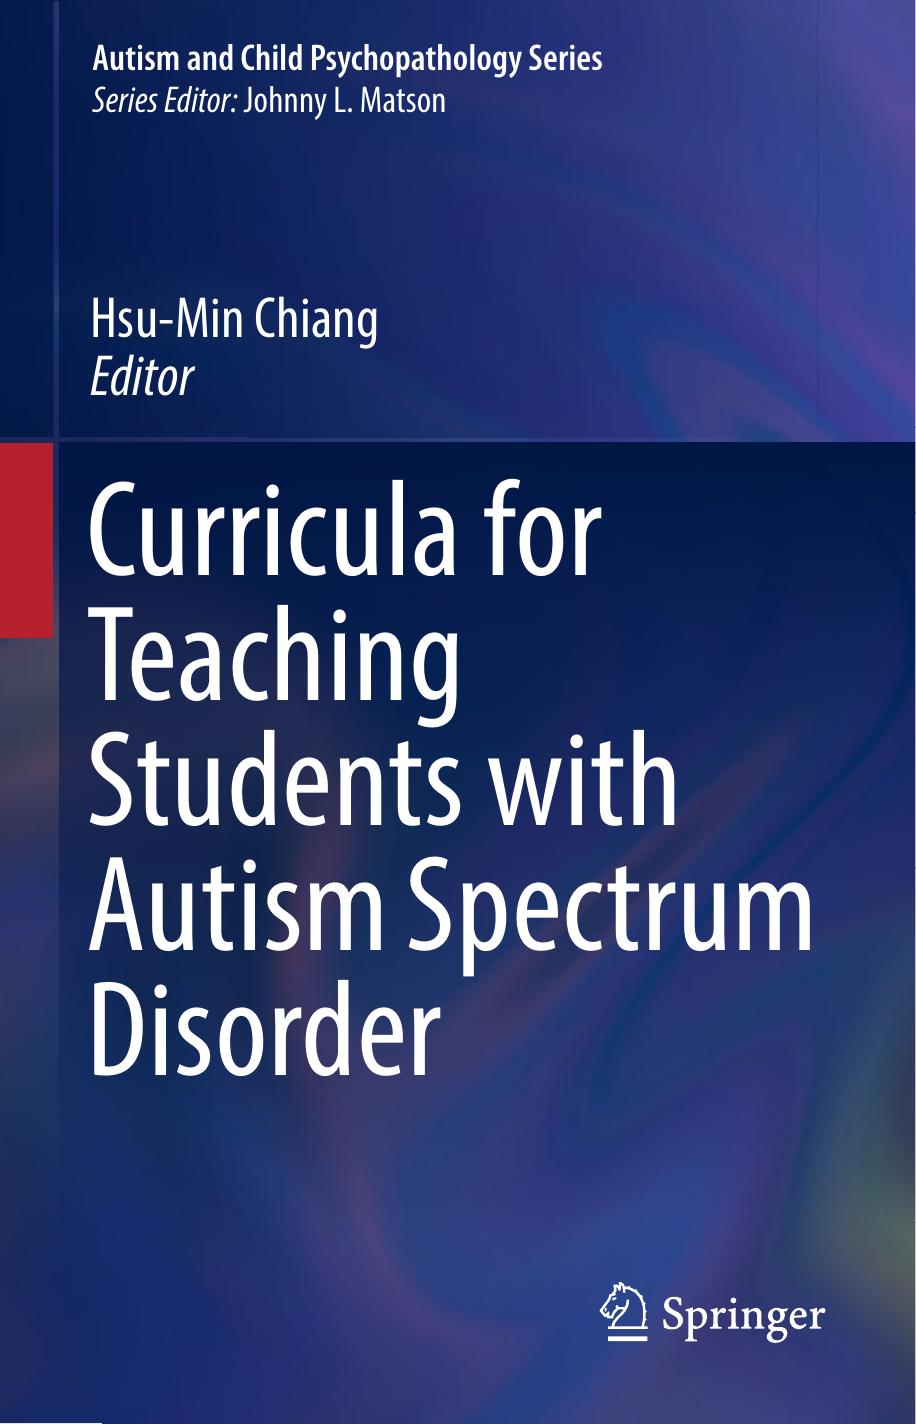 Curricula for Teaching Students with Autism Spectrum Disorder 2017.pdf